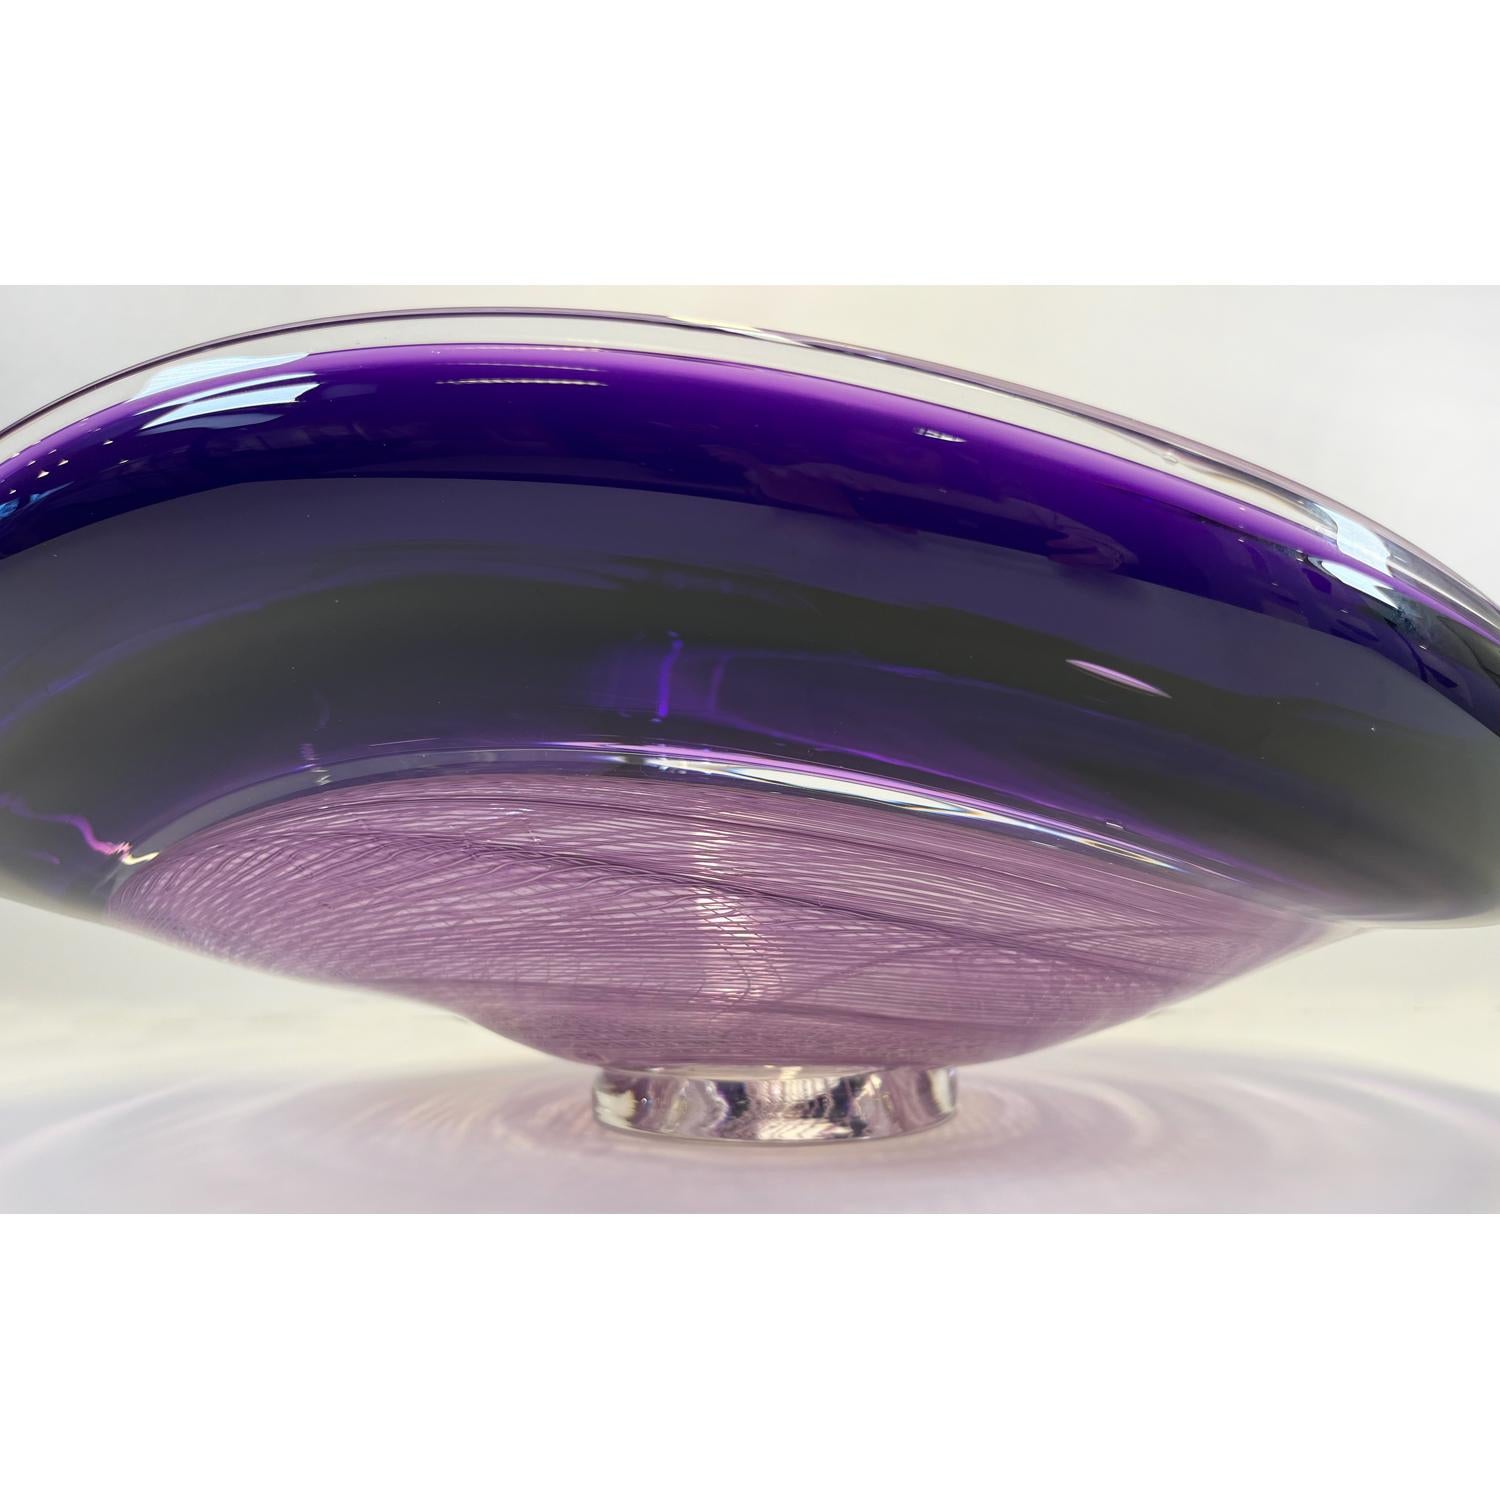 This Lilac/Amethyst Rondelle Bowl is a continuation of David's work with cane. Fusing his signature wave bowl motif with his newer rondelle cane pattern. This beautiful glass bowl is sure to be a showstopper in your space. 

David Thai is a Chinese